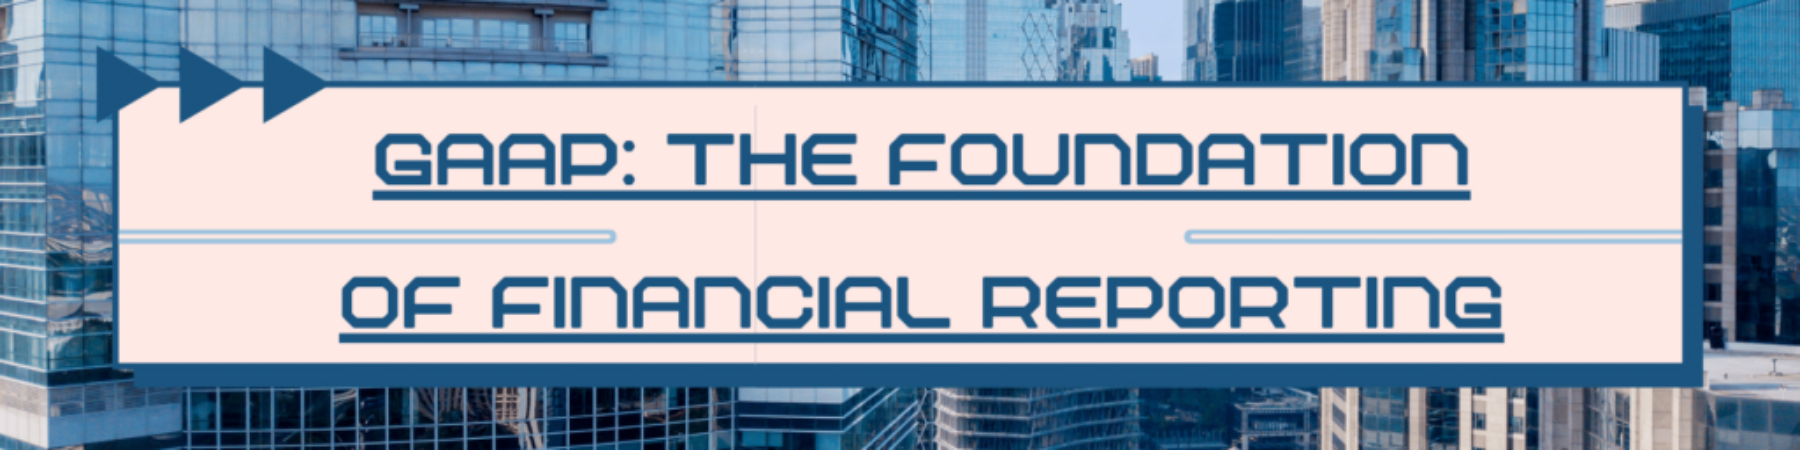 GAAP_ The Foundation of Financial Reporting